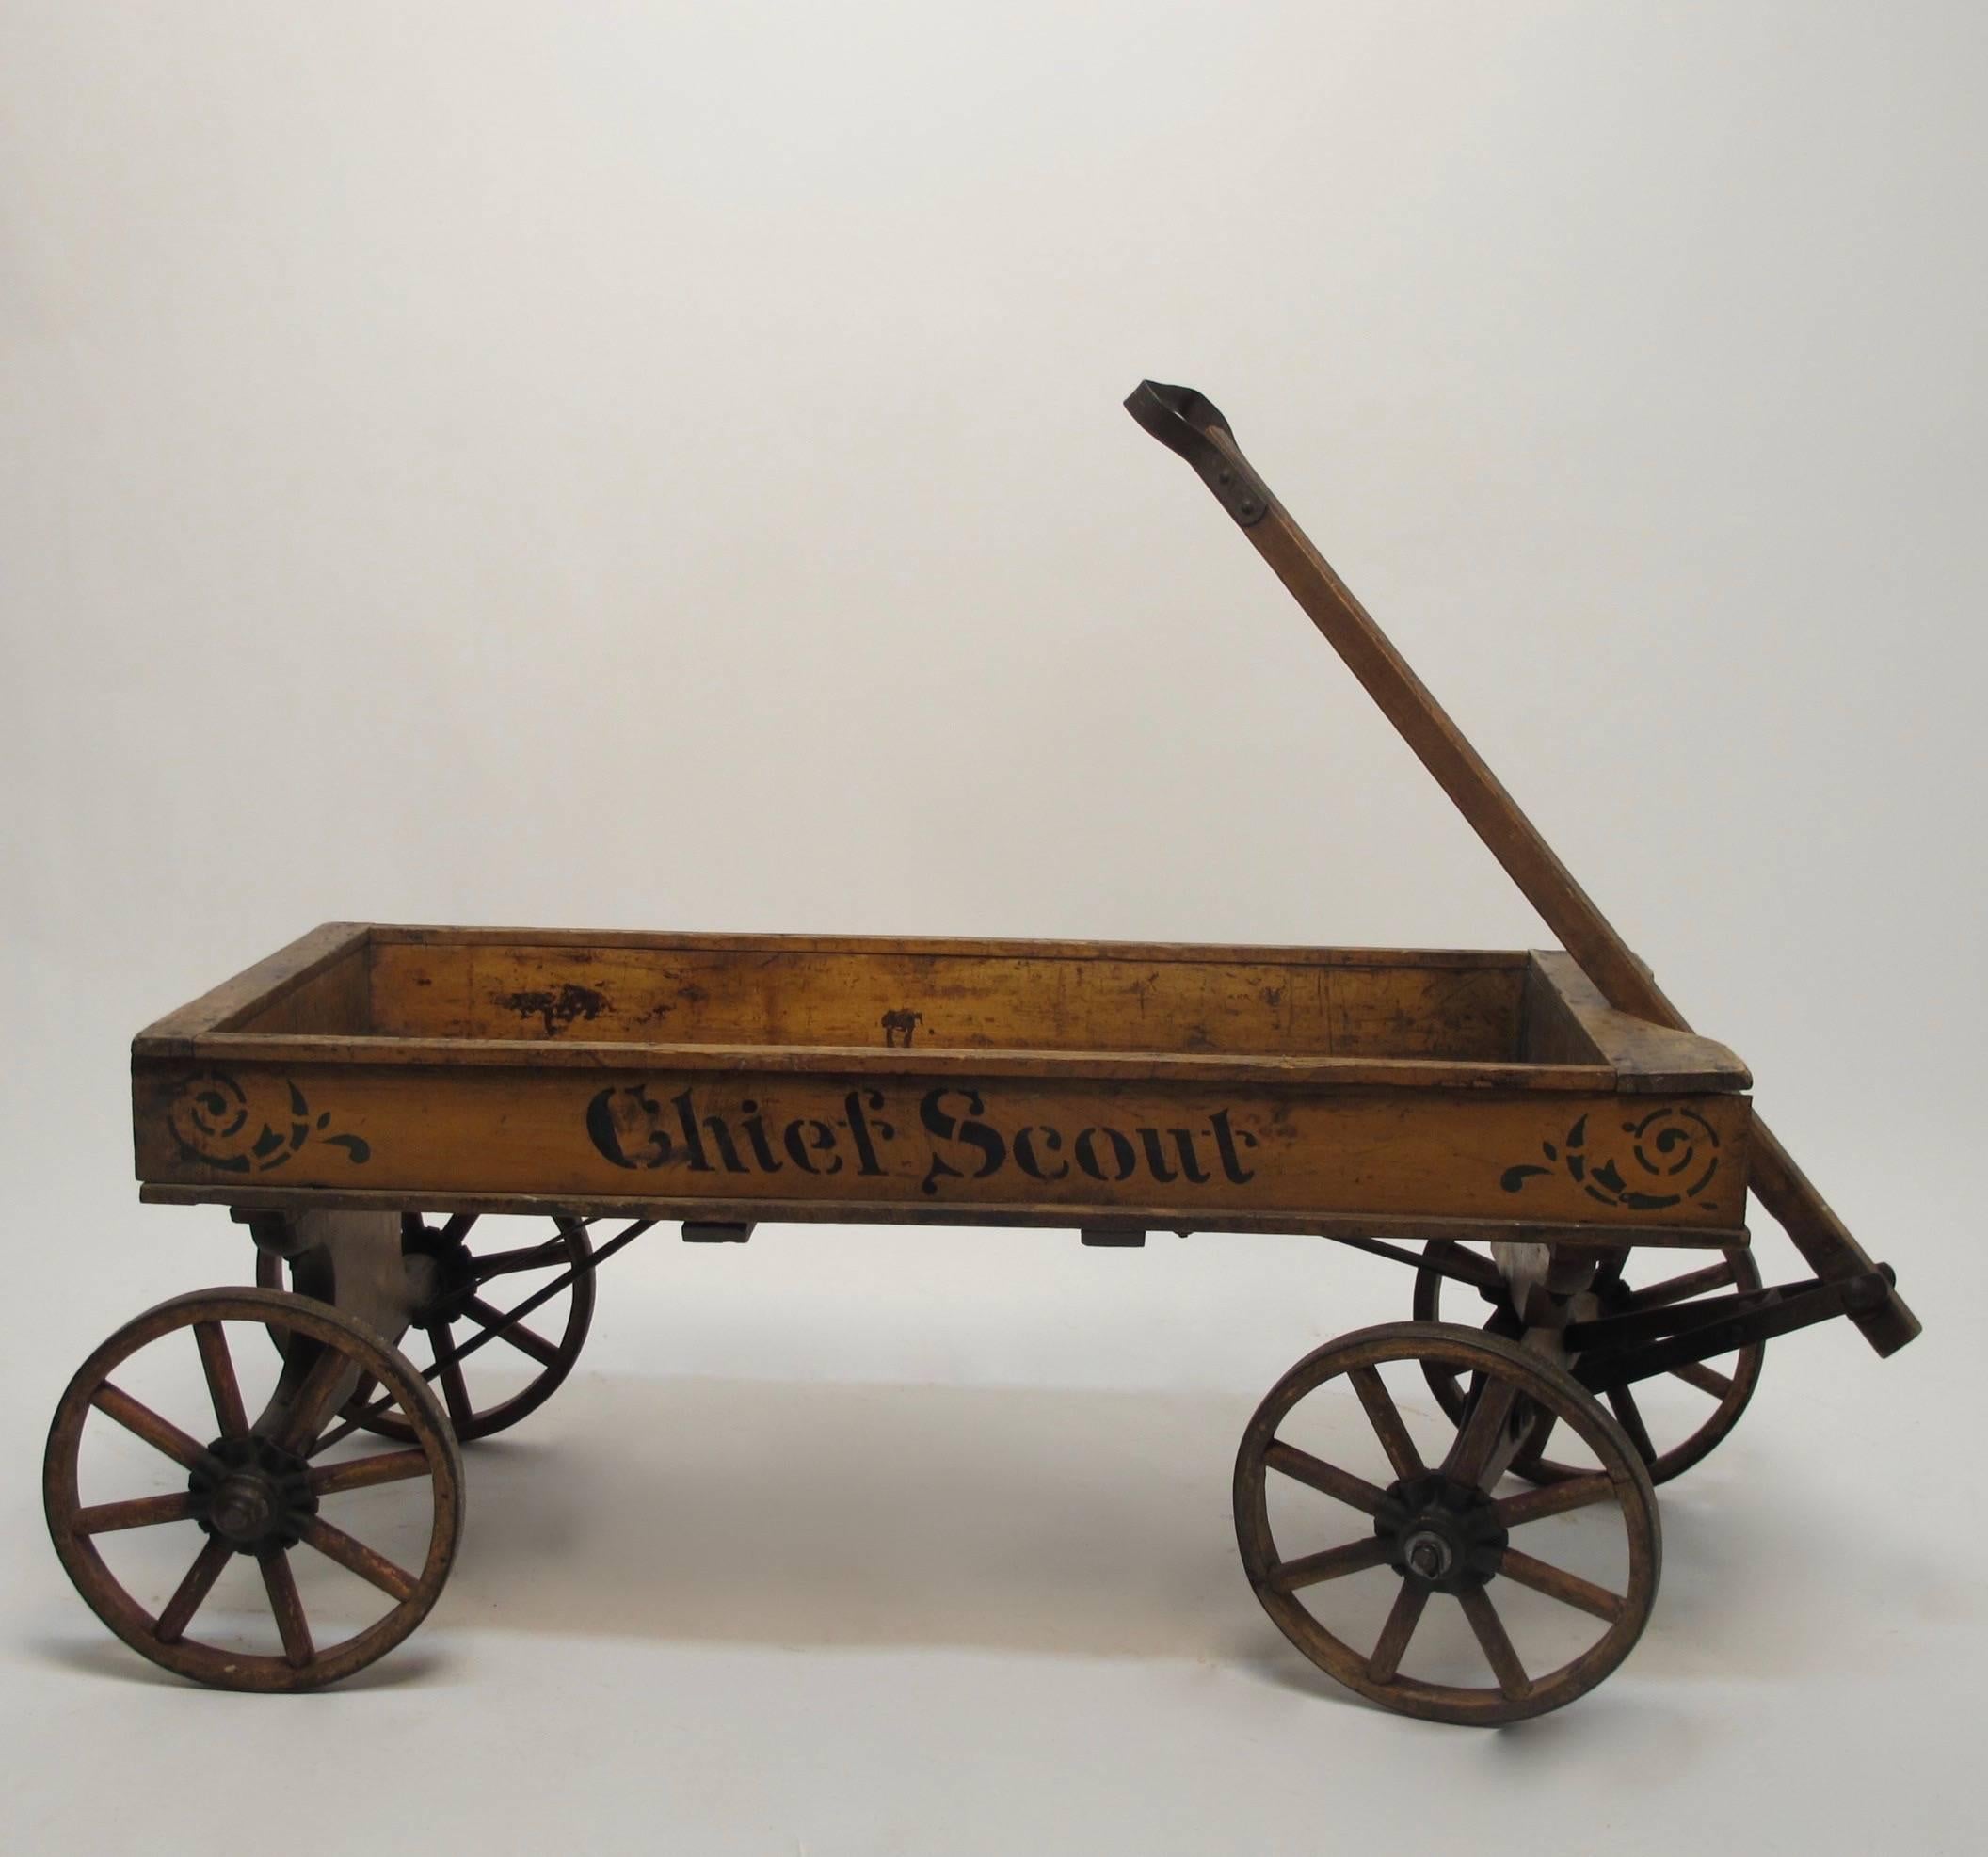 Original antique Chief Scout child's wagon in remarkably good condition with original finish, paint and stenciling. American made by Lewis-Geer MFG. Co. The last owner used as a coffee table with a glass top.